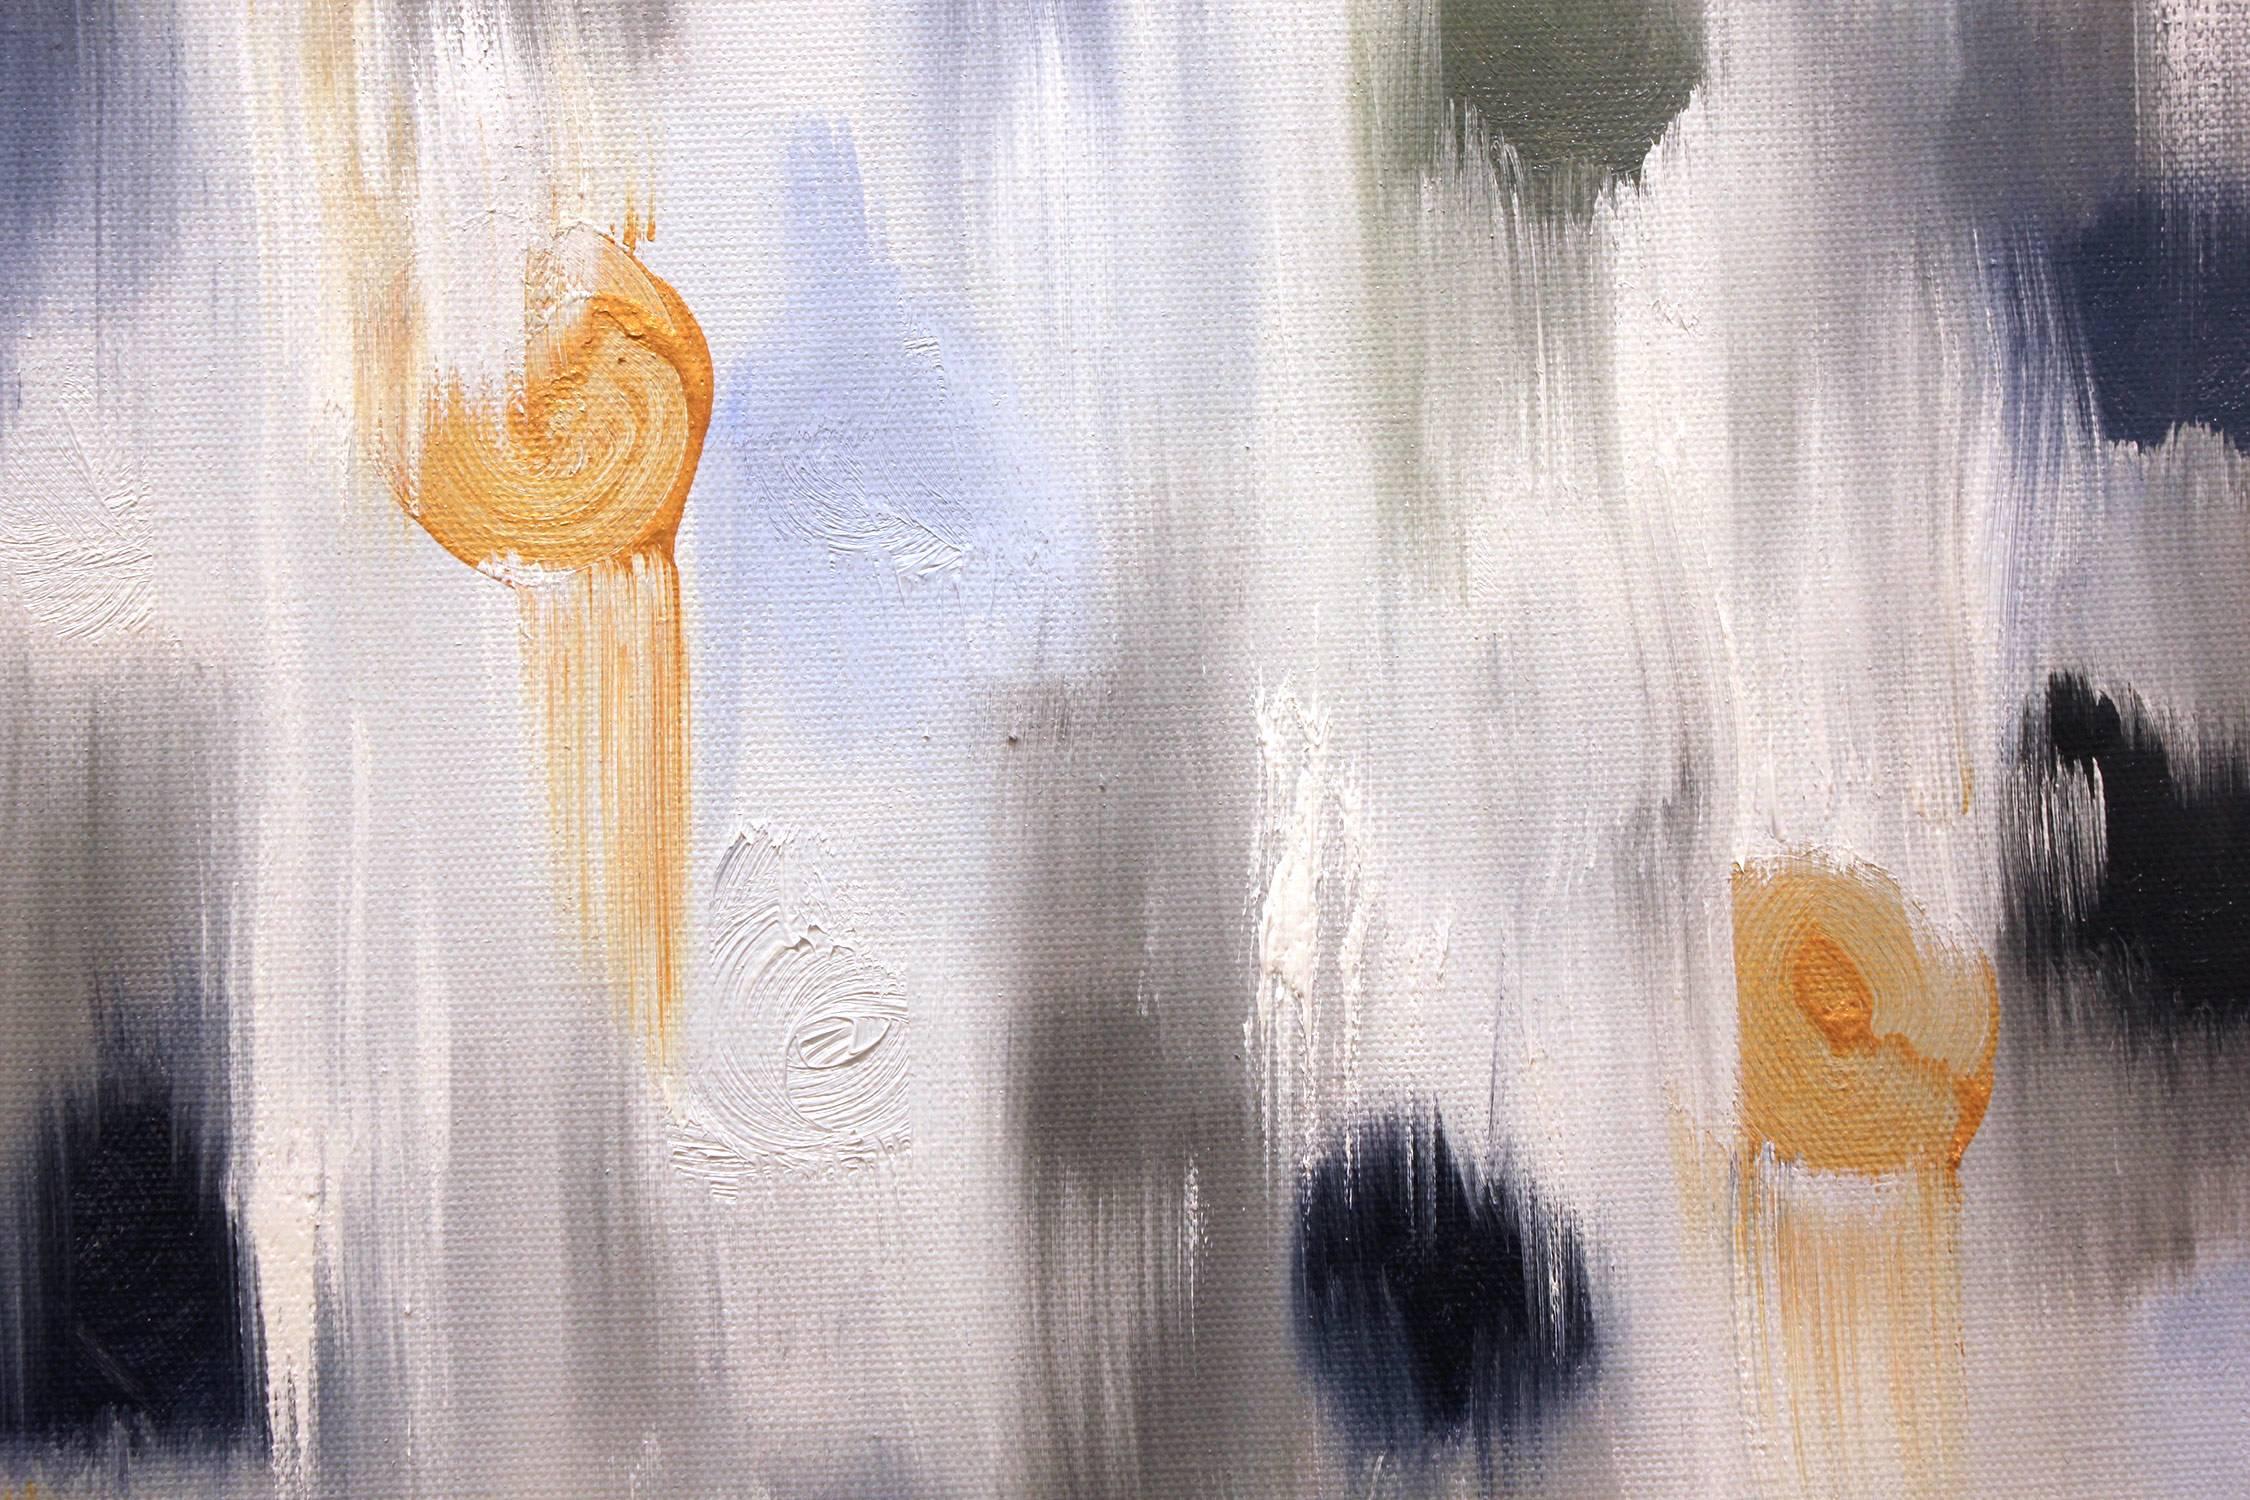 Dripping Dots, Aspen 2 - Painting by Cindy Shaoul